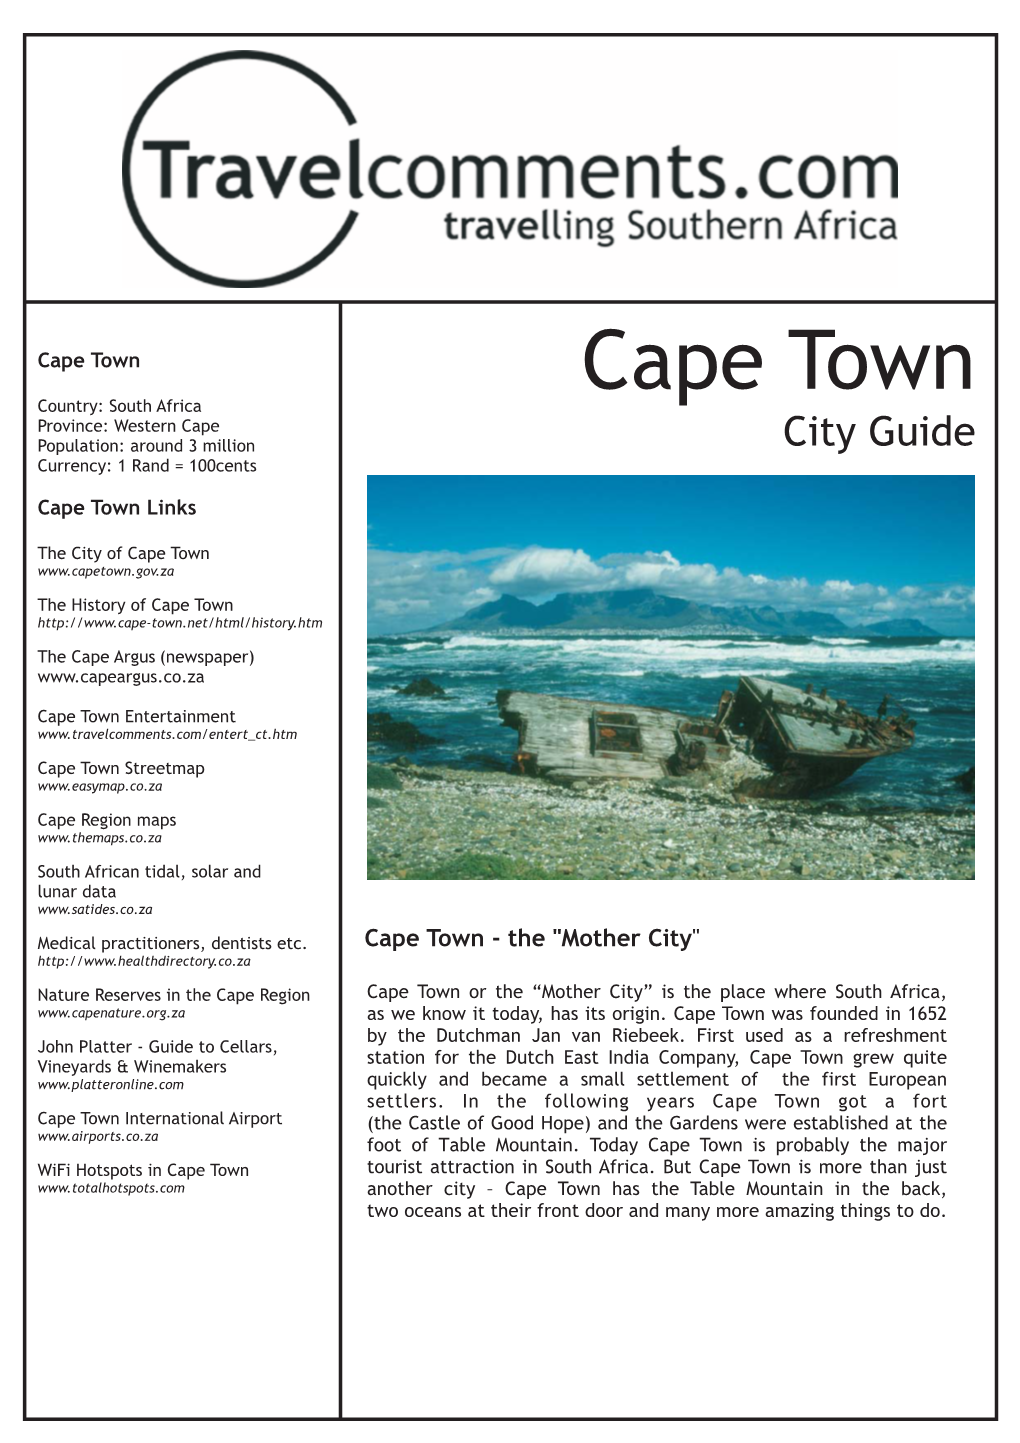 Cape Town Cape Town Country: South Africa Province: Western Cape Population: Around 3 Million City Guide Currency: 1 Rand = 100Cents